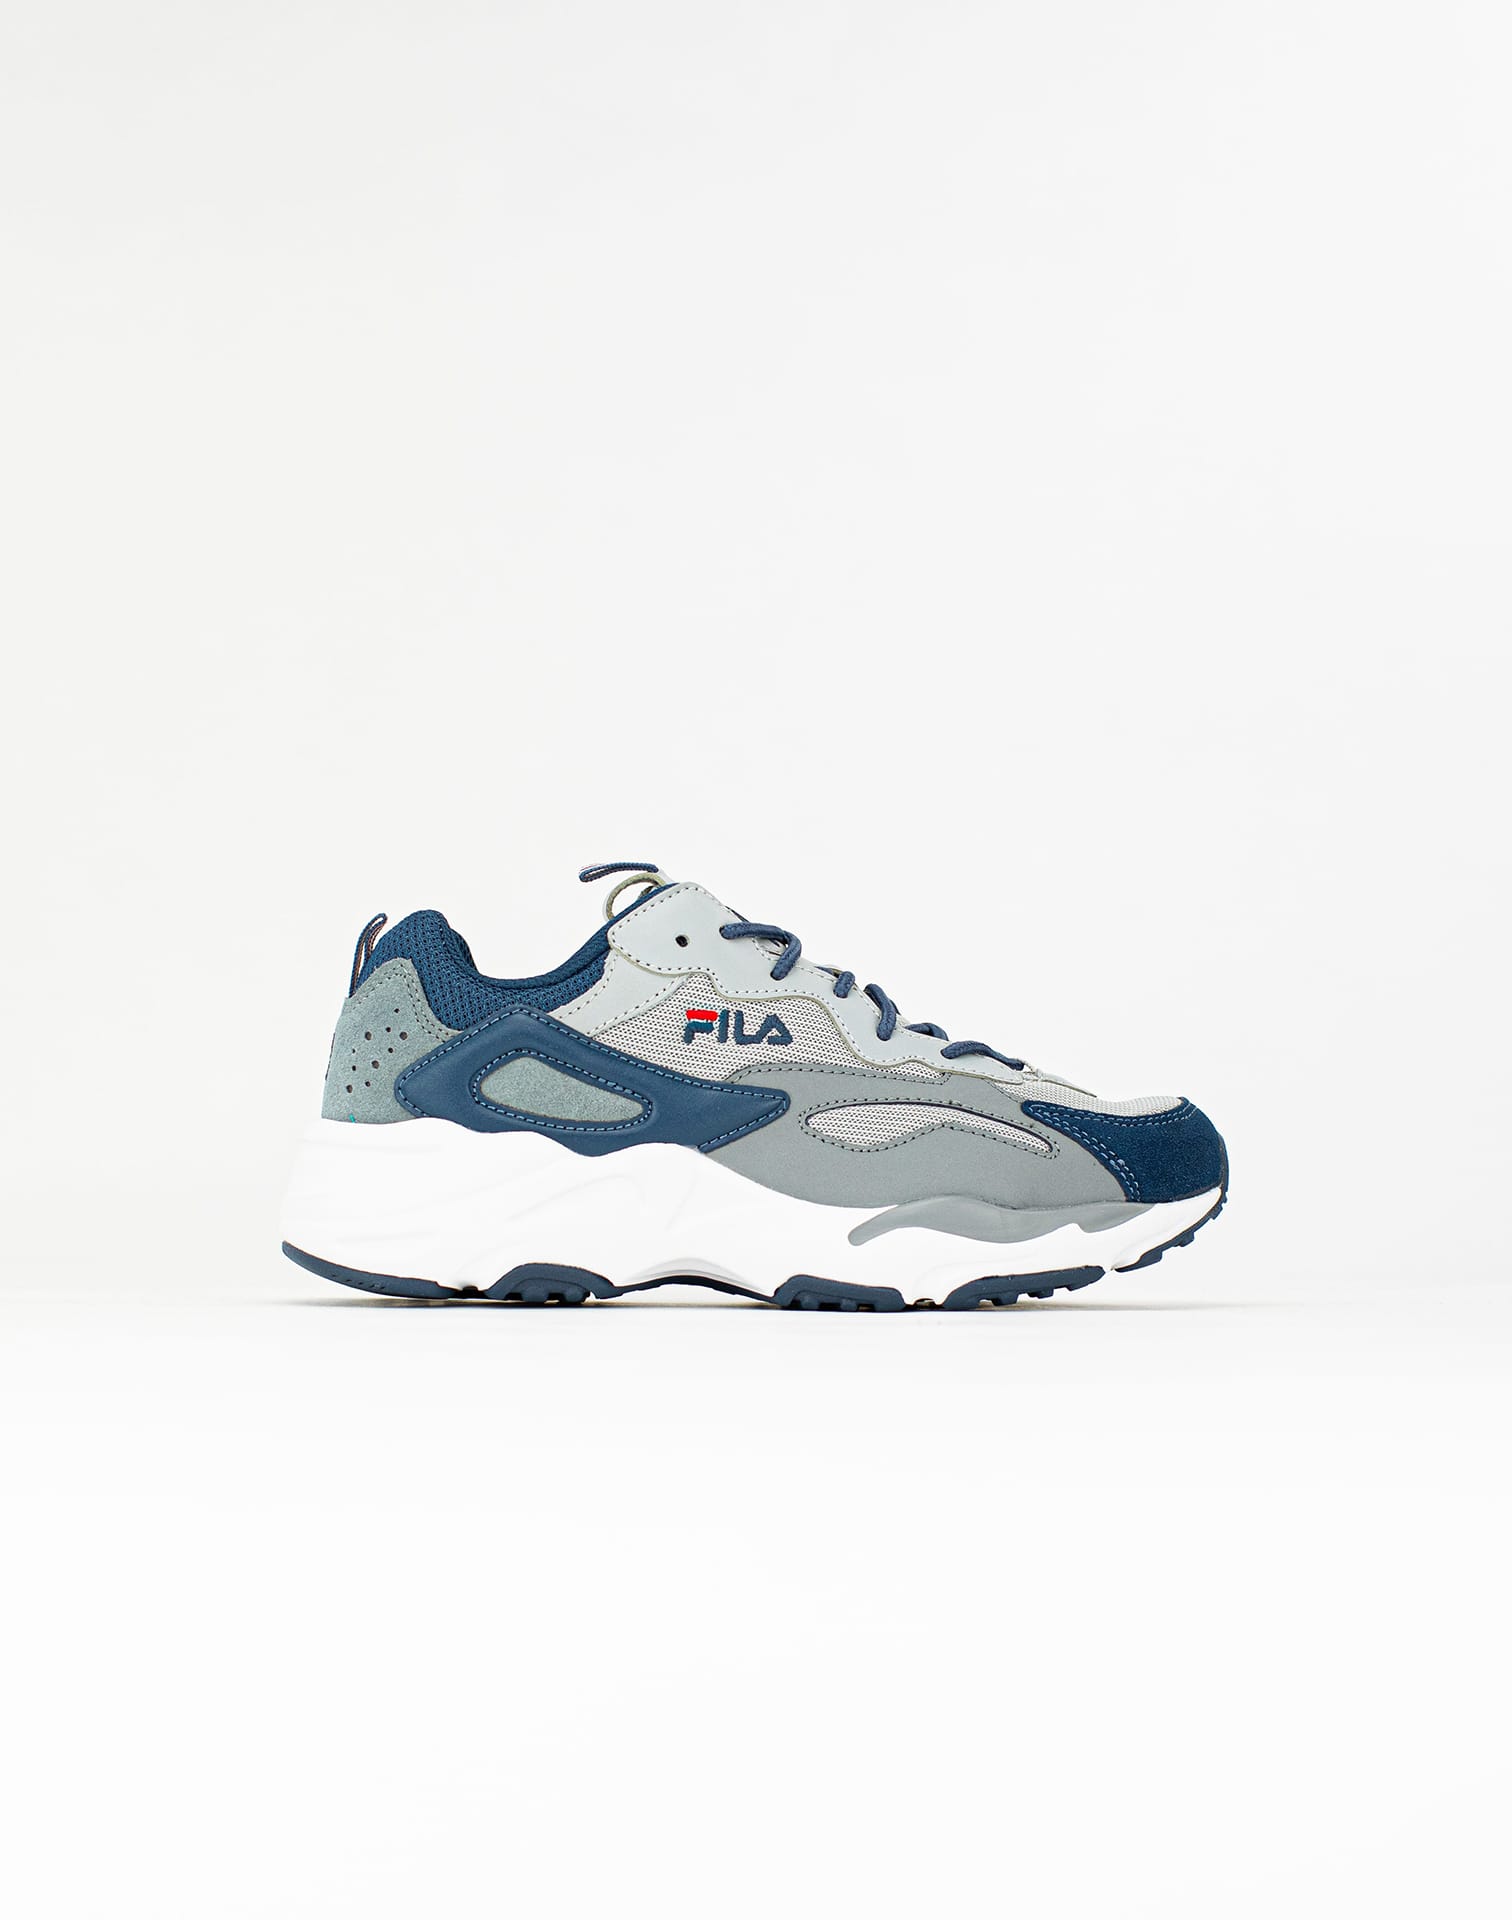 FILA Ray Tracer Sneaker | Sneakers, Trendy shoes, Fila ray tracer